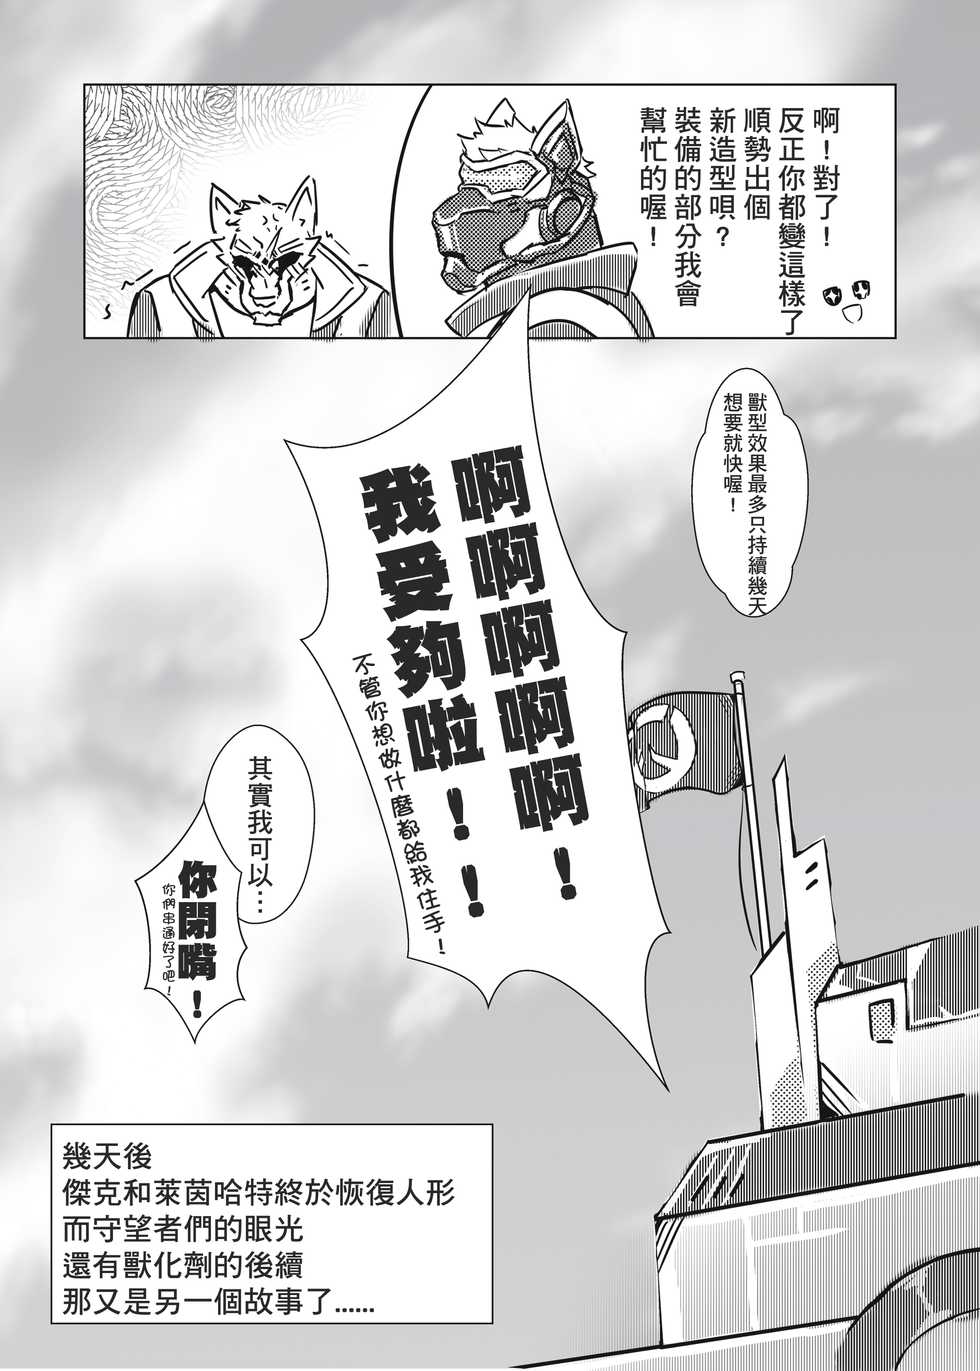 [Lander] Strange Things Happened (Overwatch) [Chinese] - Page 26